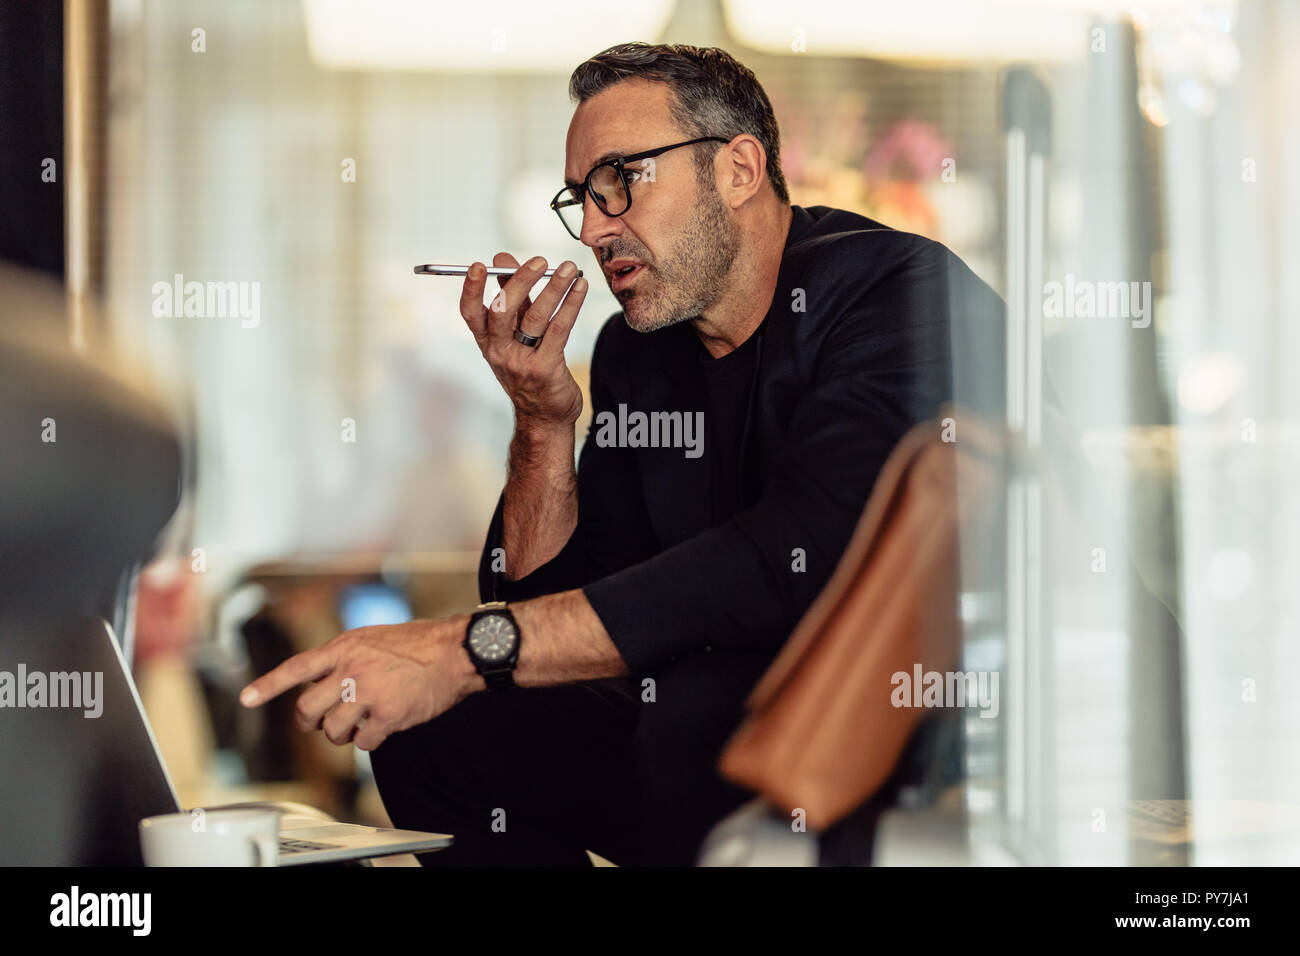 Mature businessman sitting in the hotel lobby with laptop making phone call. Male entrepreneur sitting in hotel waiting area making call. Stock Photo